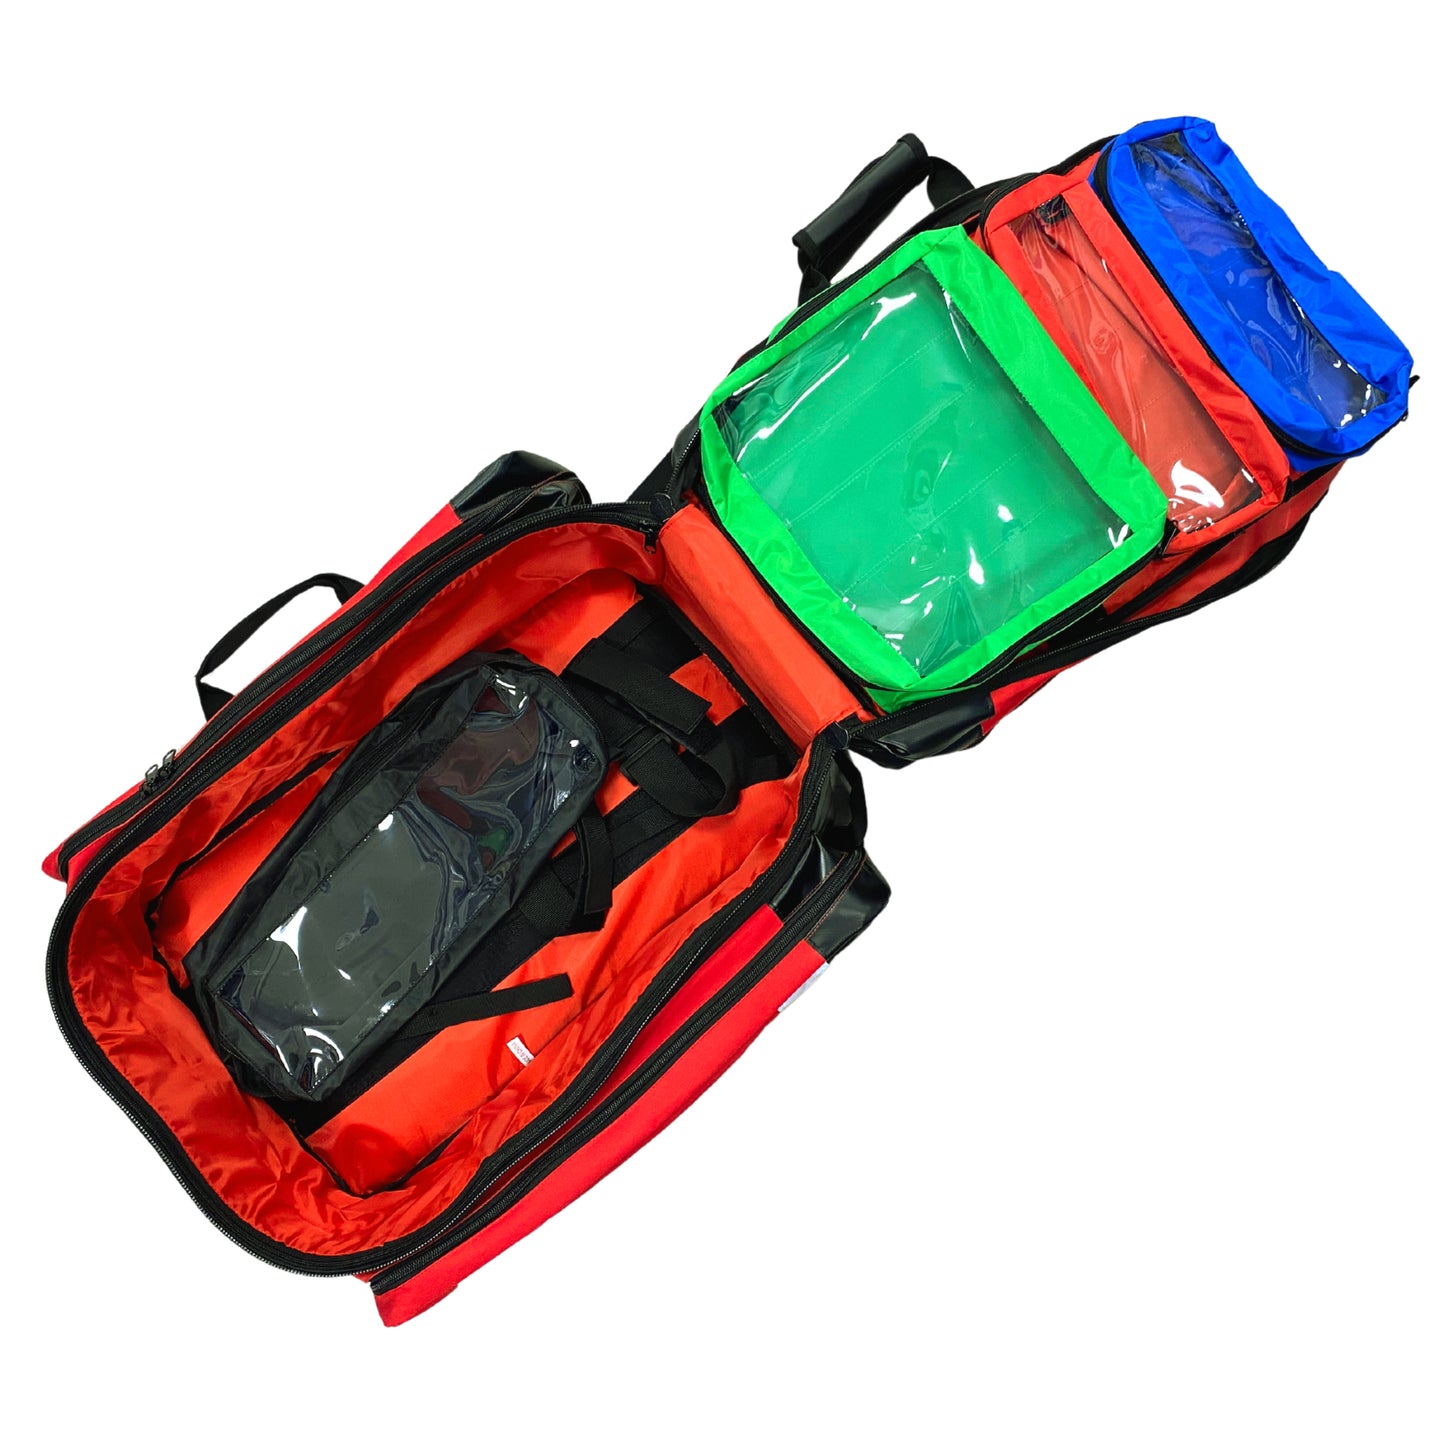 Advanced Life Support First Aid Kit - ALS Trauma Backpack